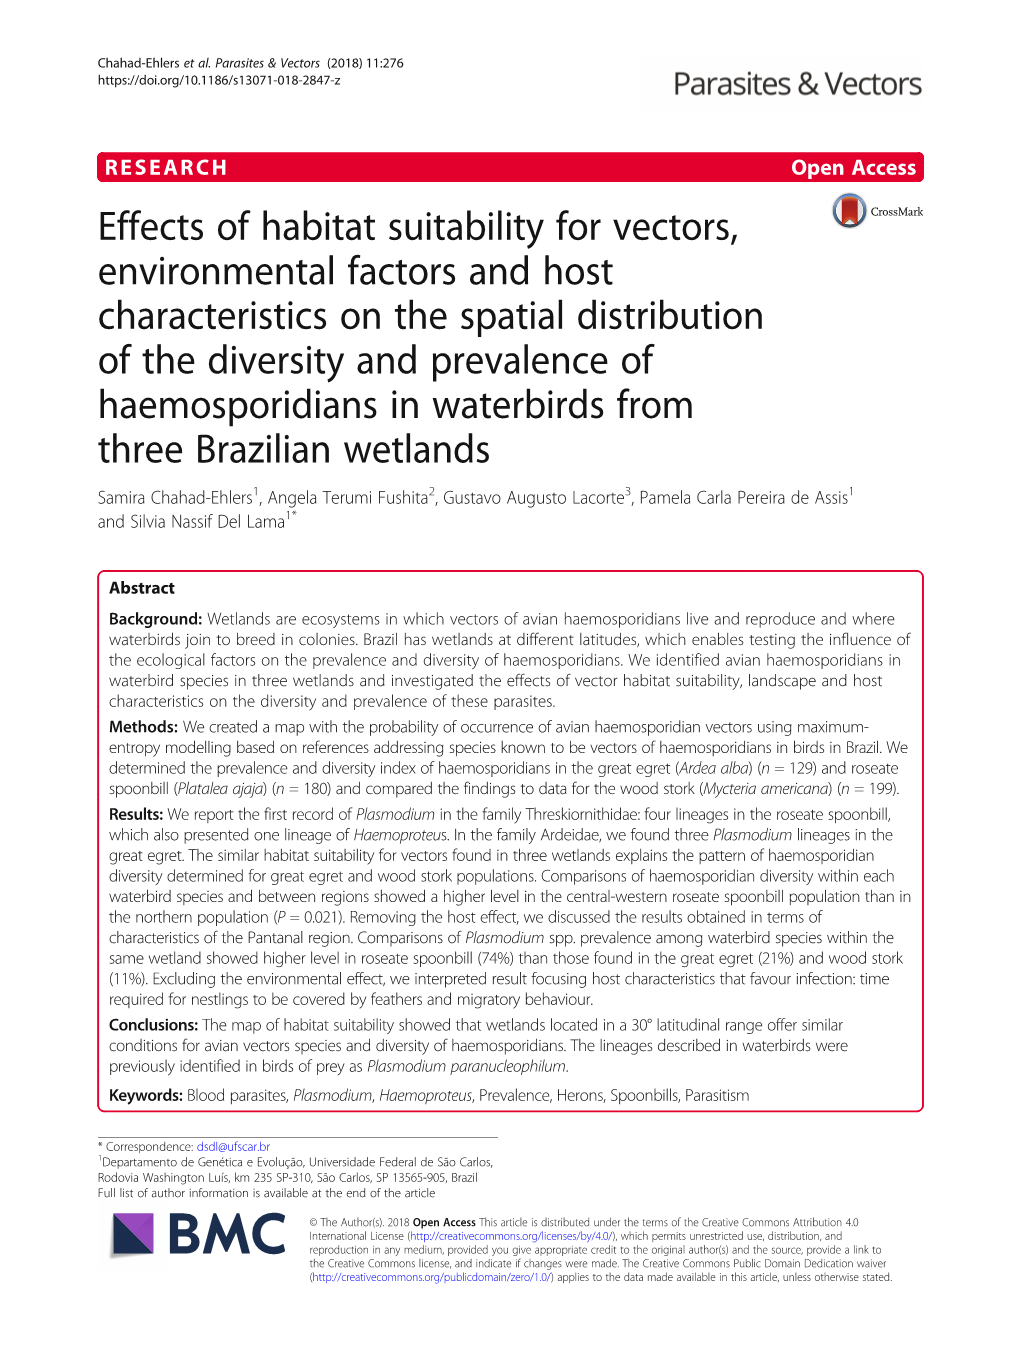 Effects of Habitat Suitability for Vectors, Environmental Factors and Host